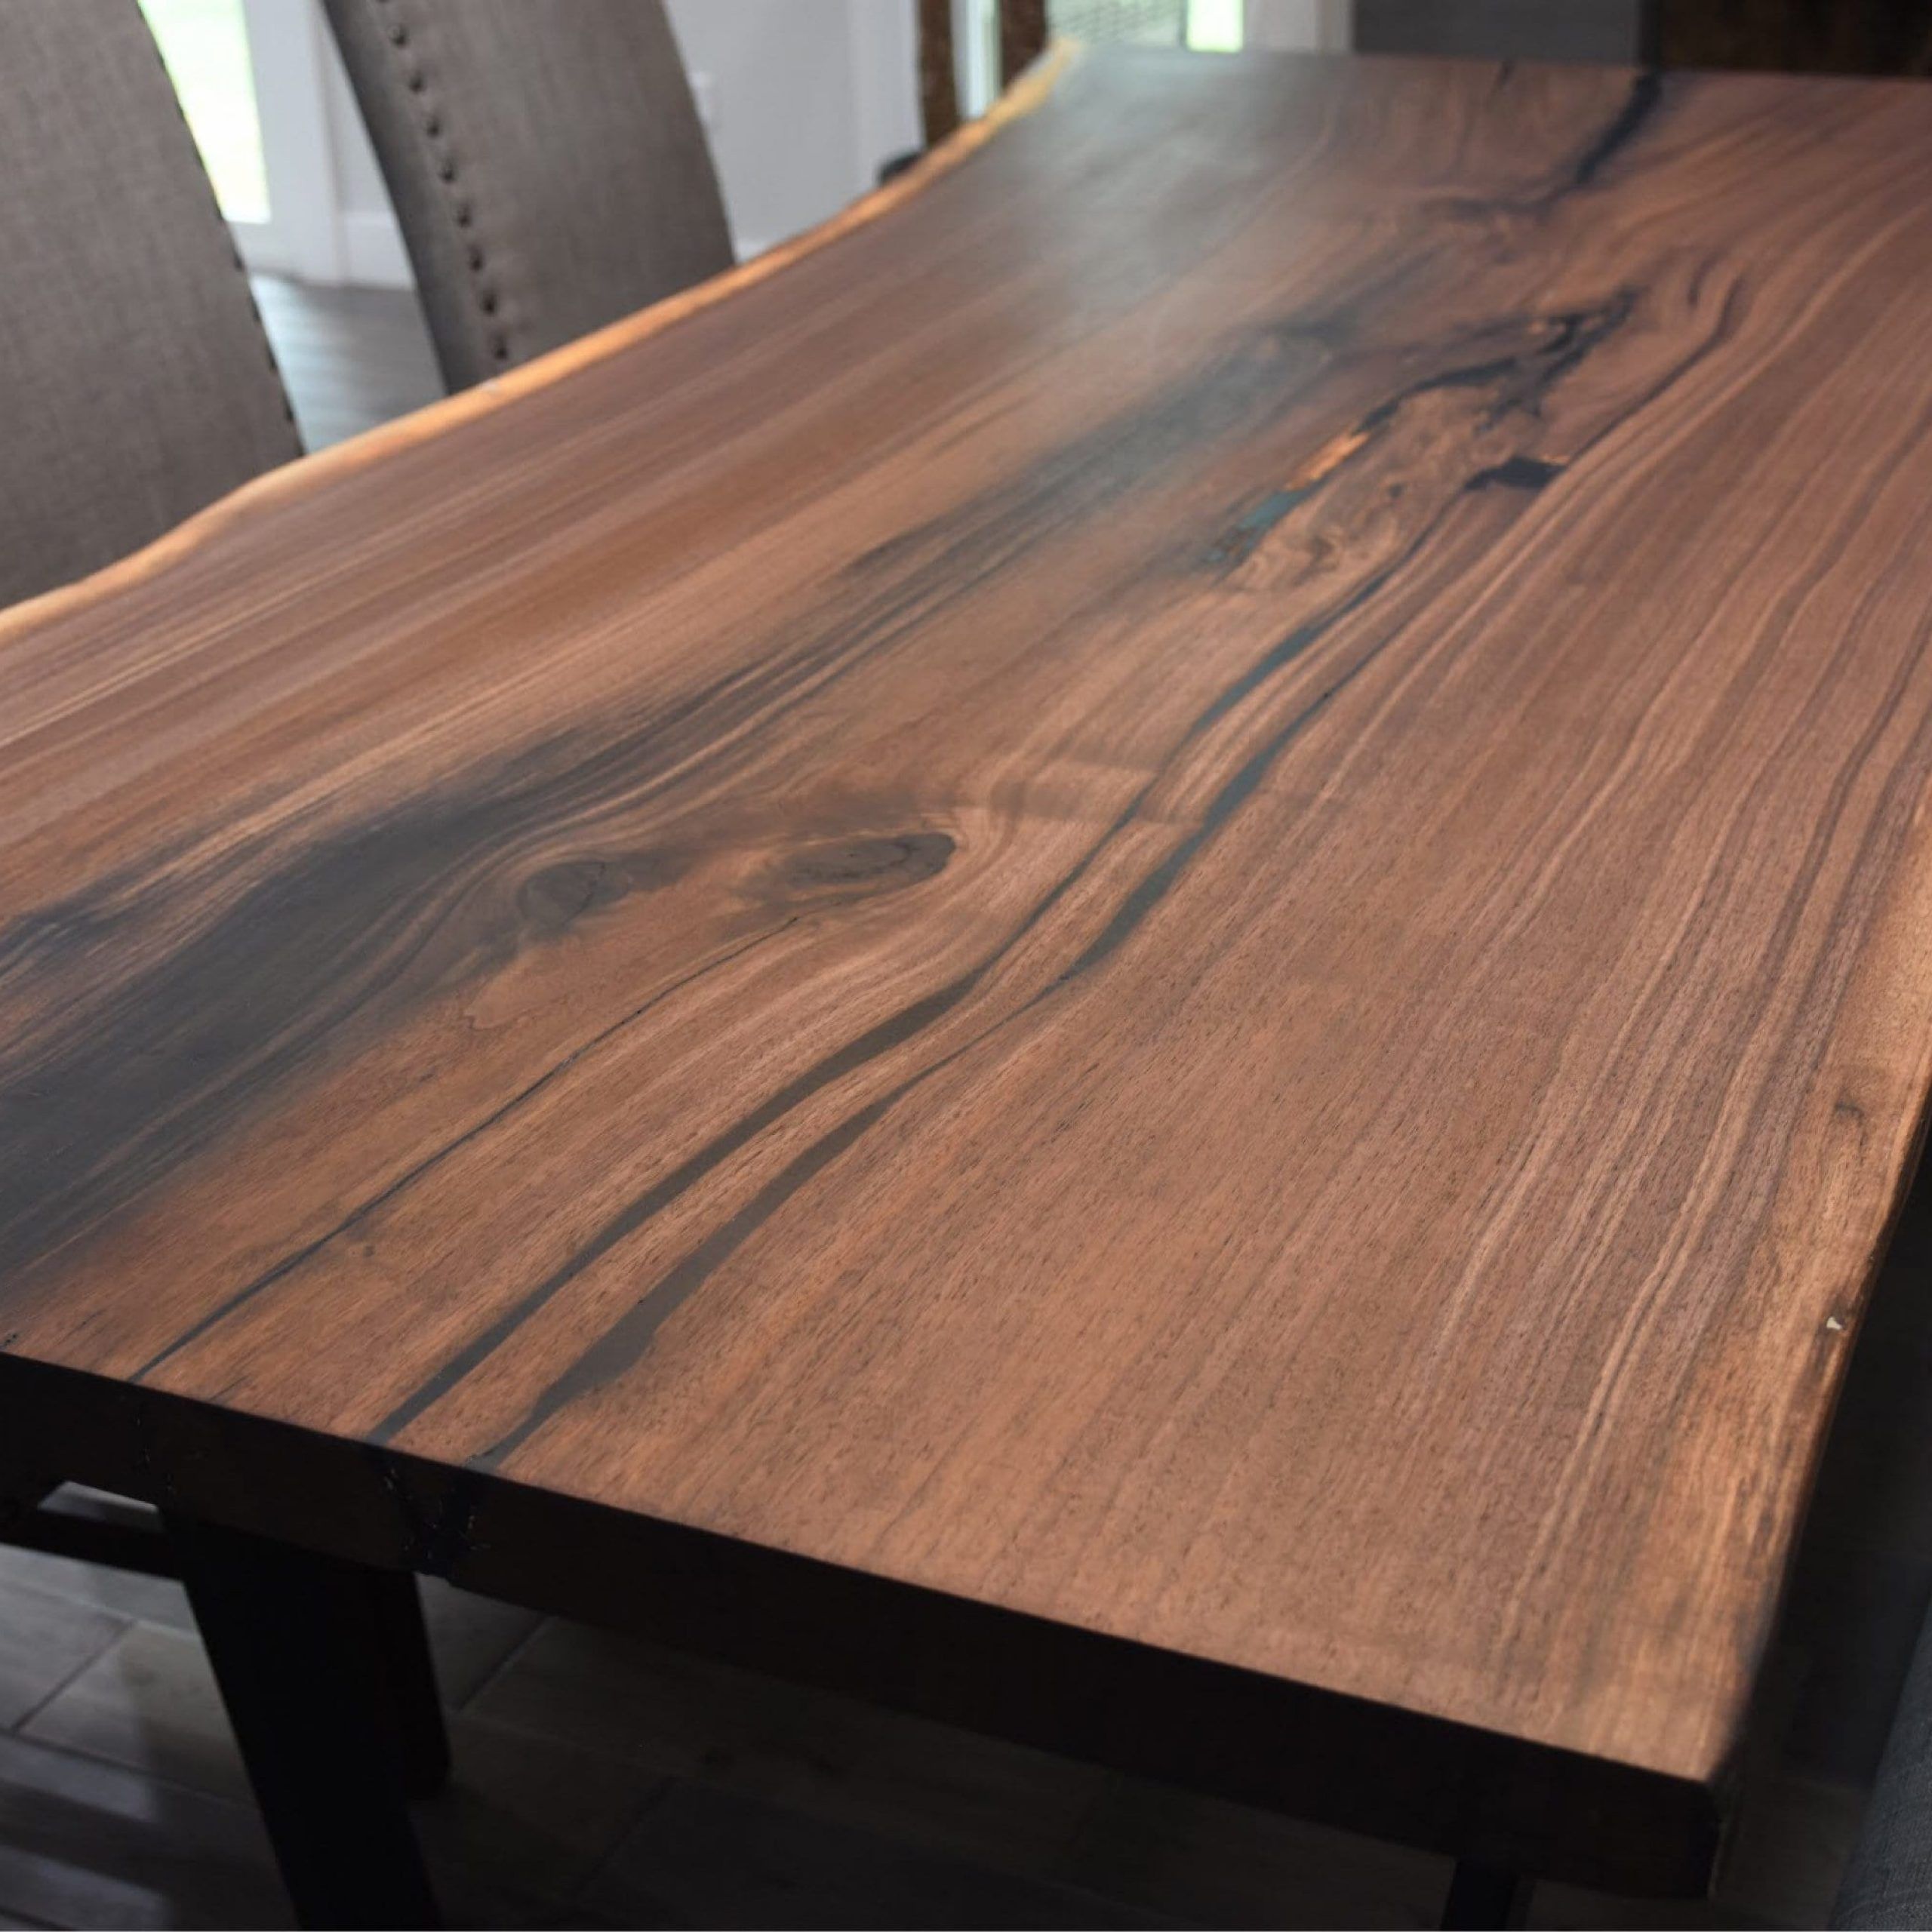 Black Walnut Live Edge Dining Table With Recent Dark Walnut And Black Dining Tables (View 3 of 15)